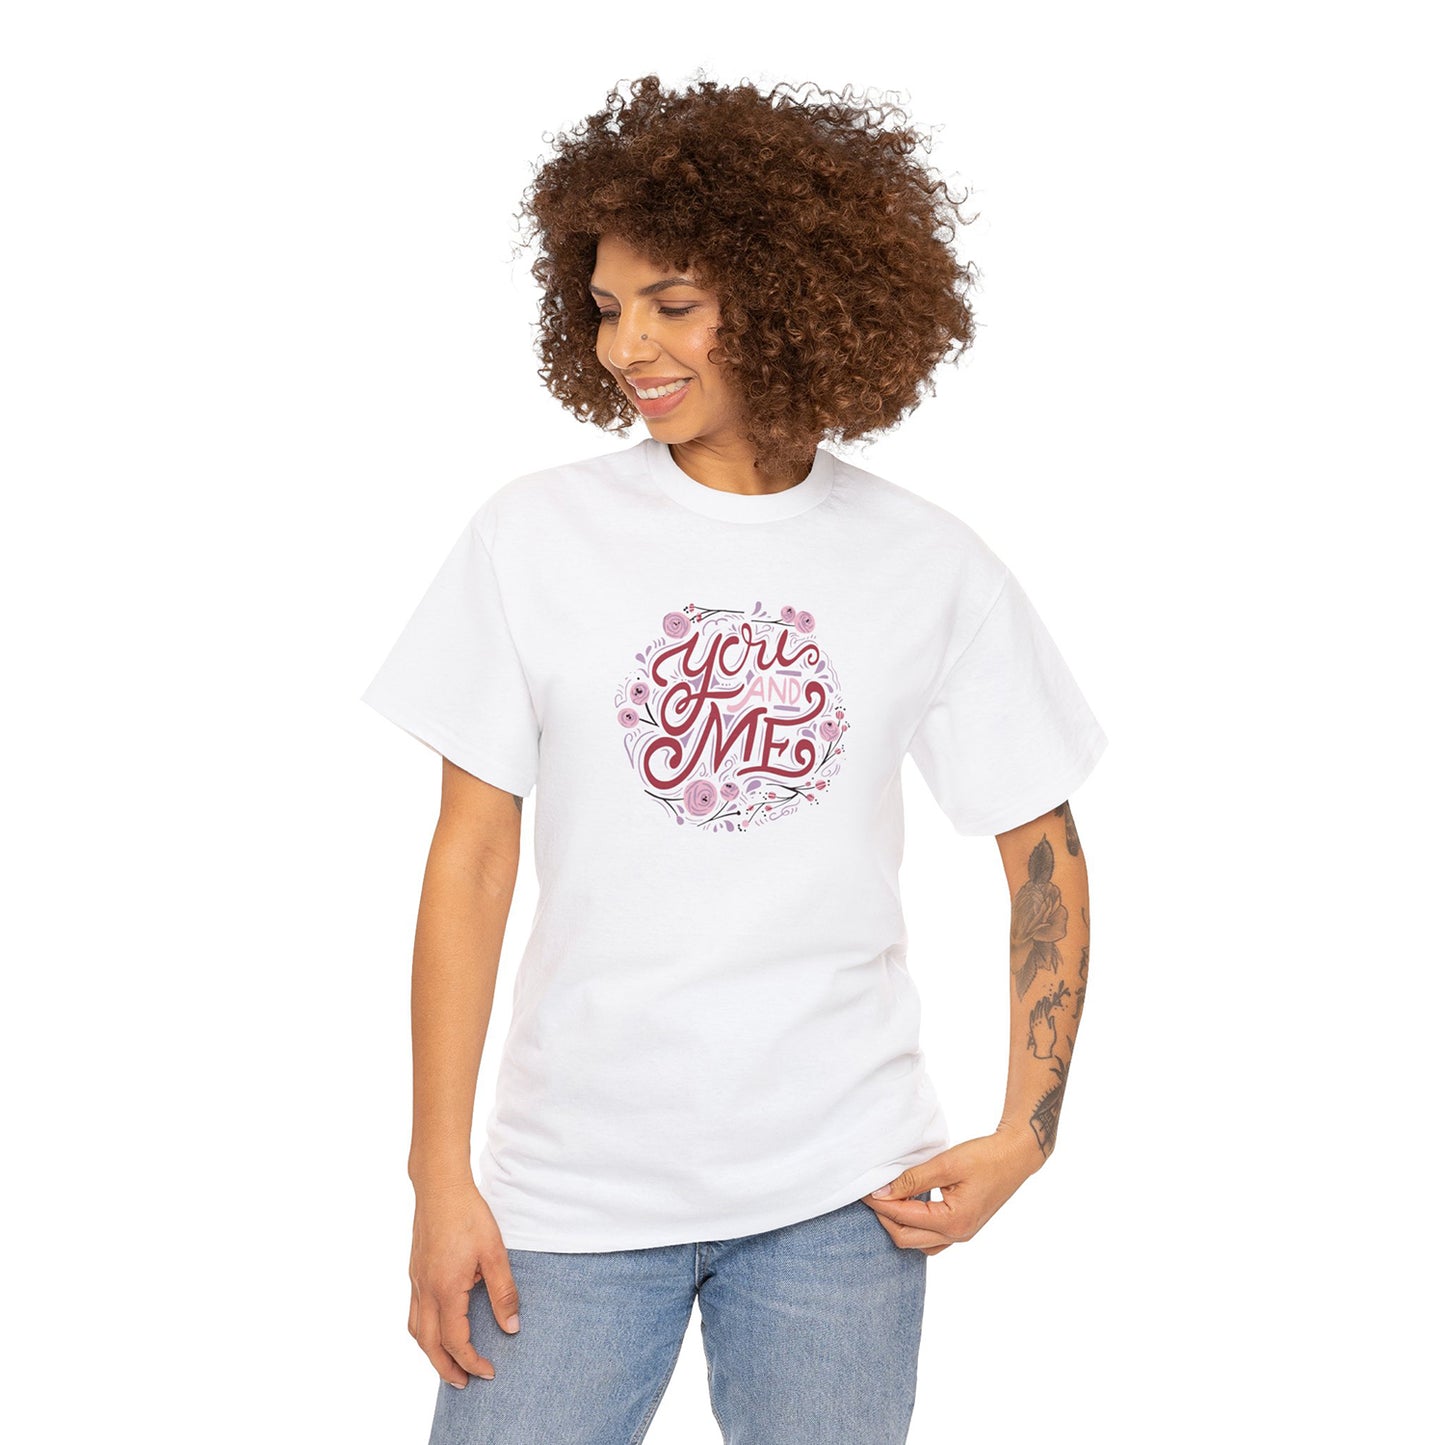 Love Express Bright Comfy Tee